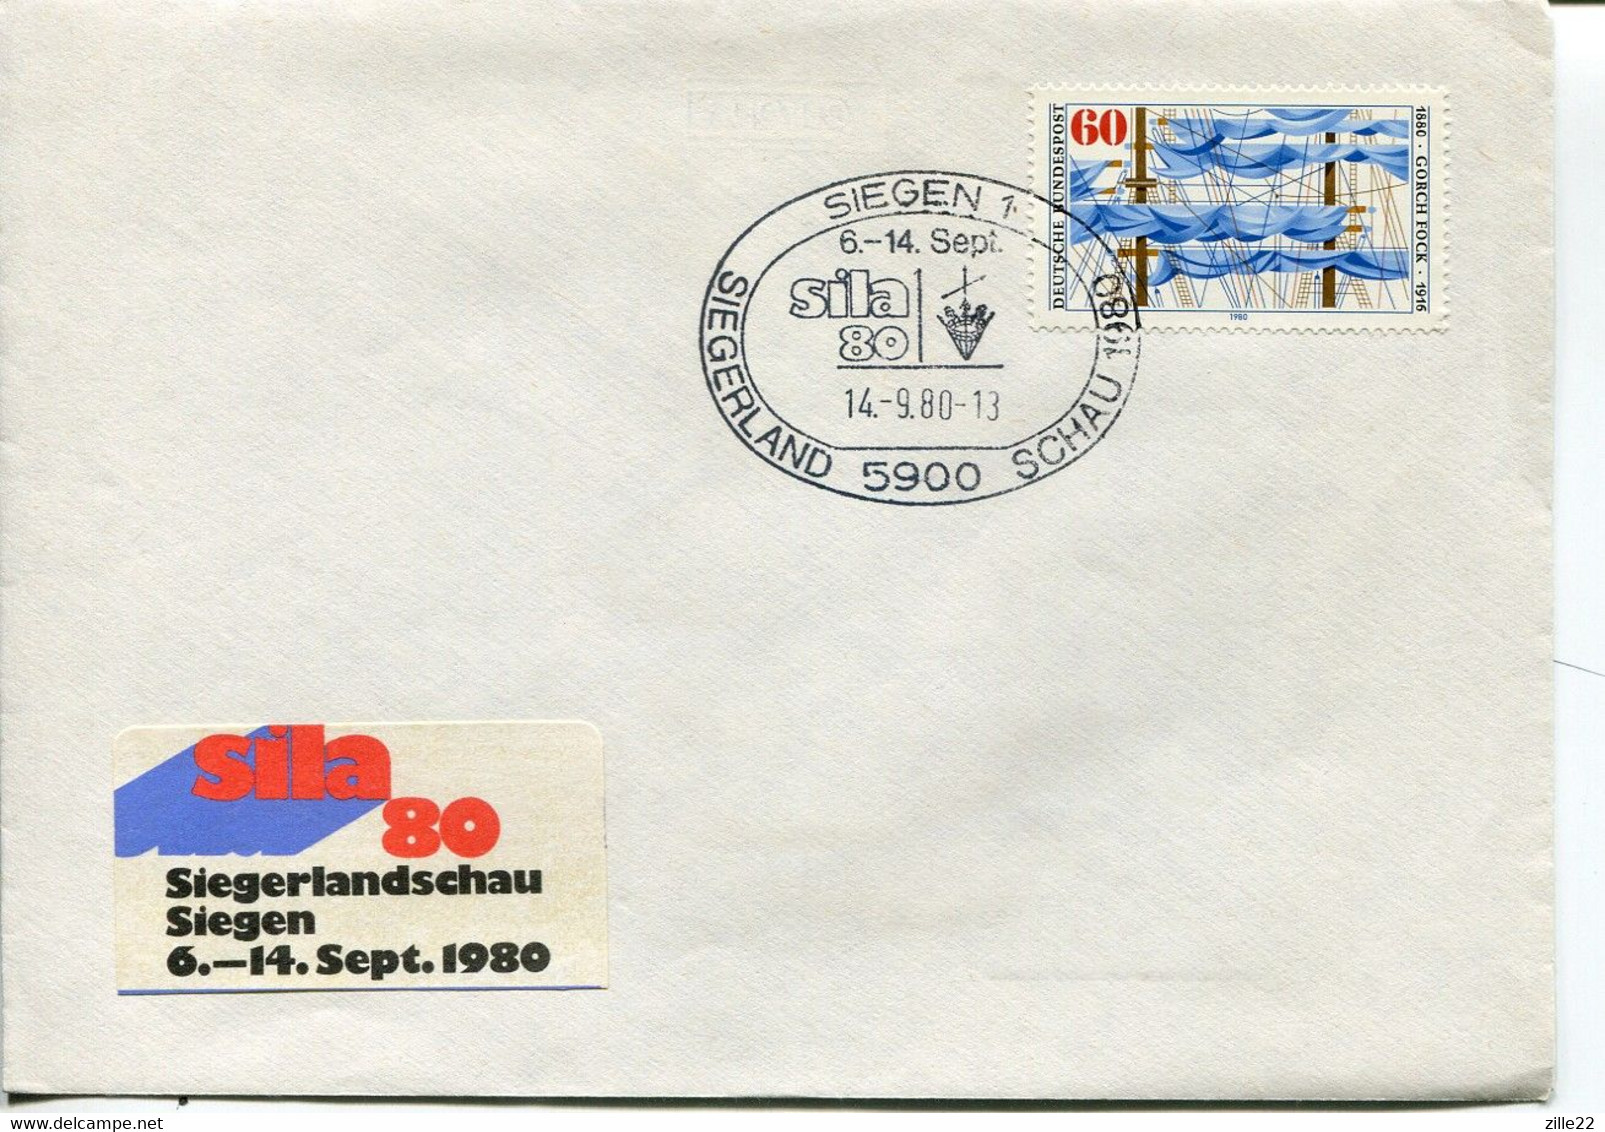 Germany Special Cover - Siegen Exhibition Sila80 - 2000 – Hannover (Duitsland)